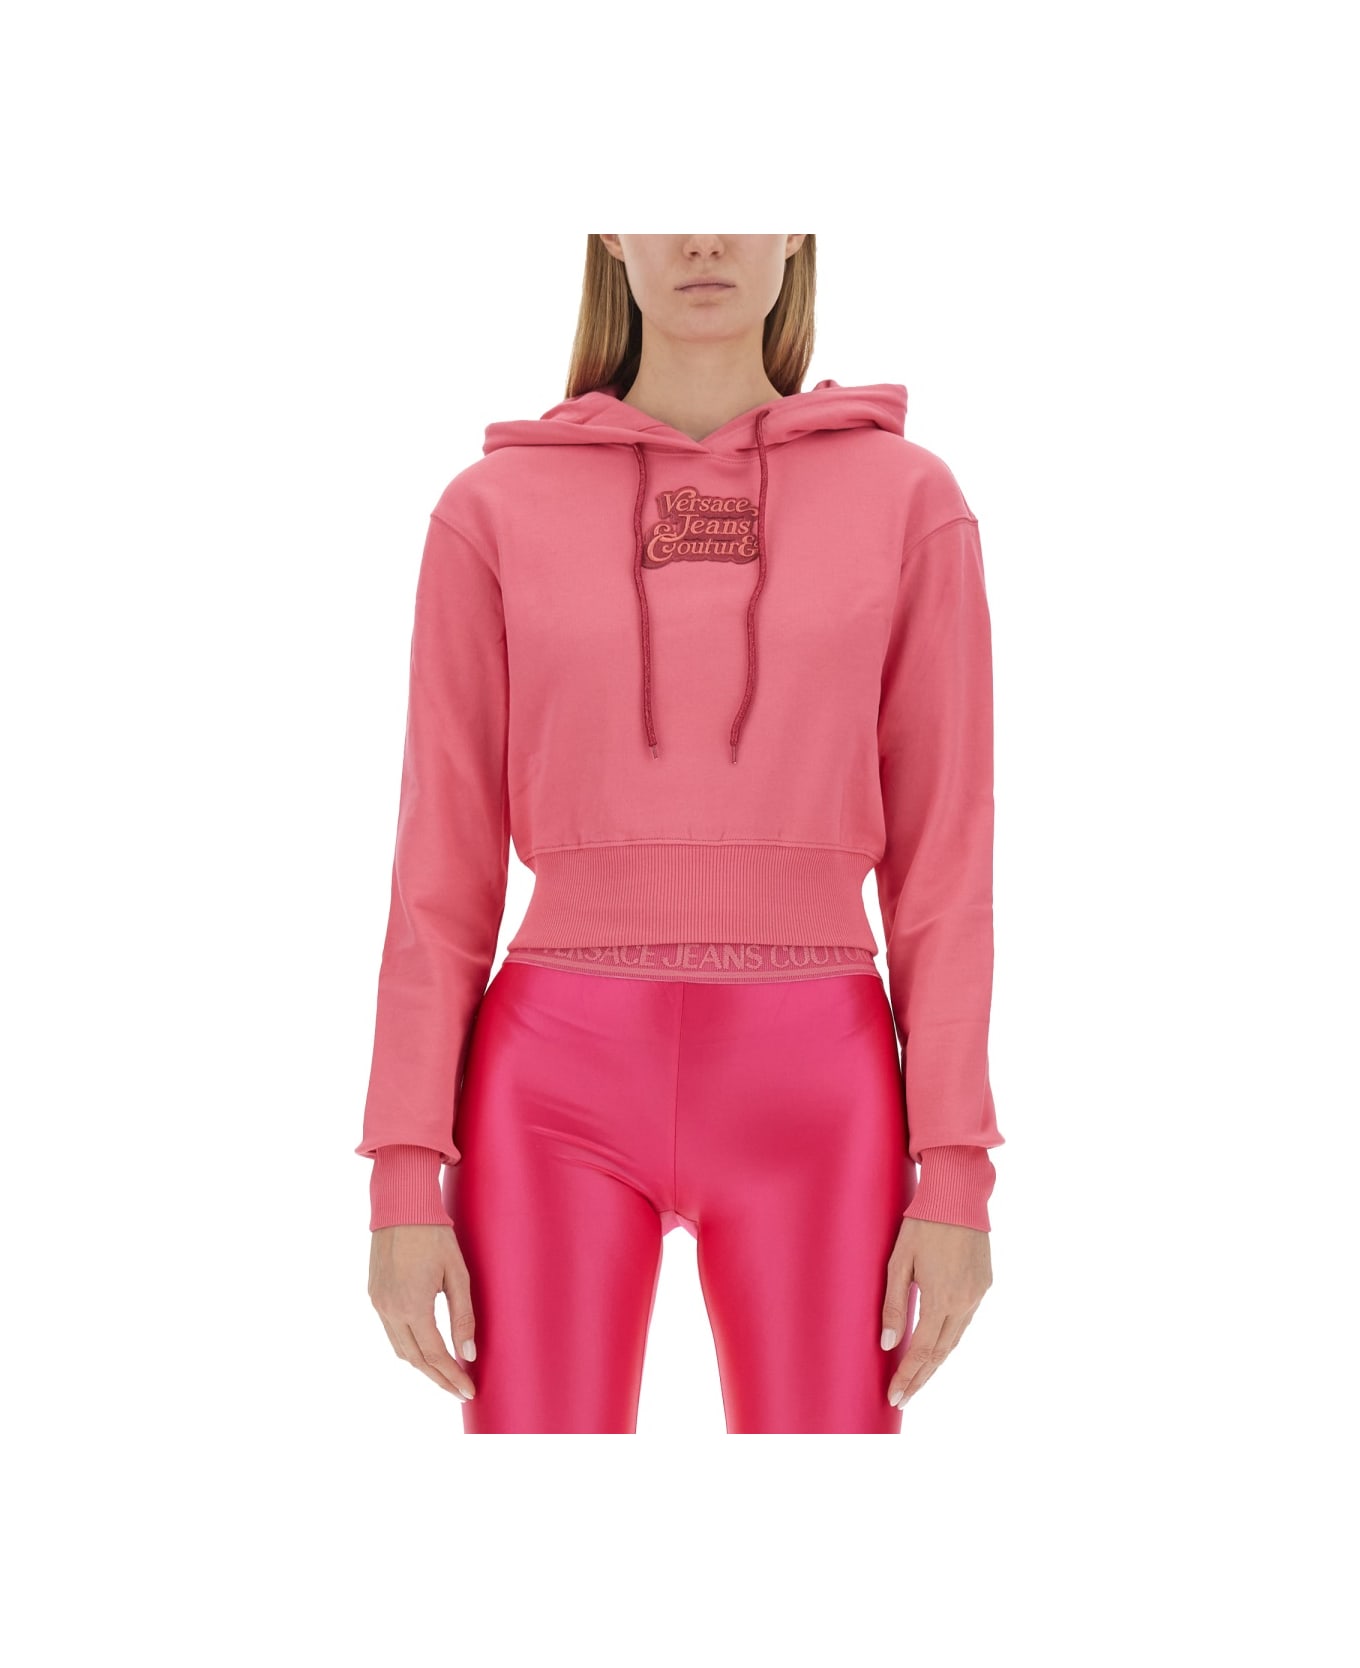 Versace Jeans Couture Cropped Sweatshirt - FUCHSIA